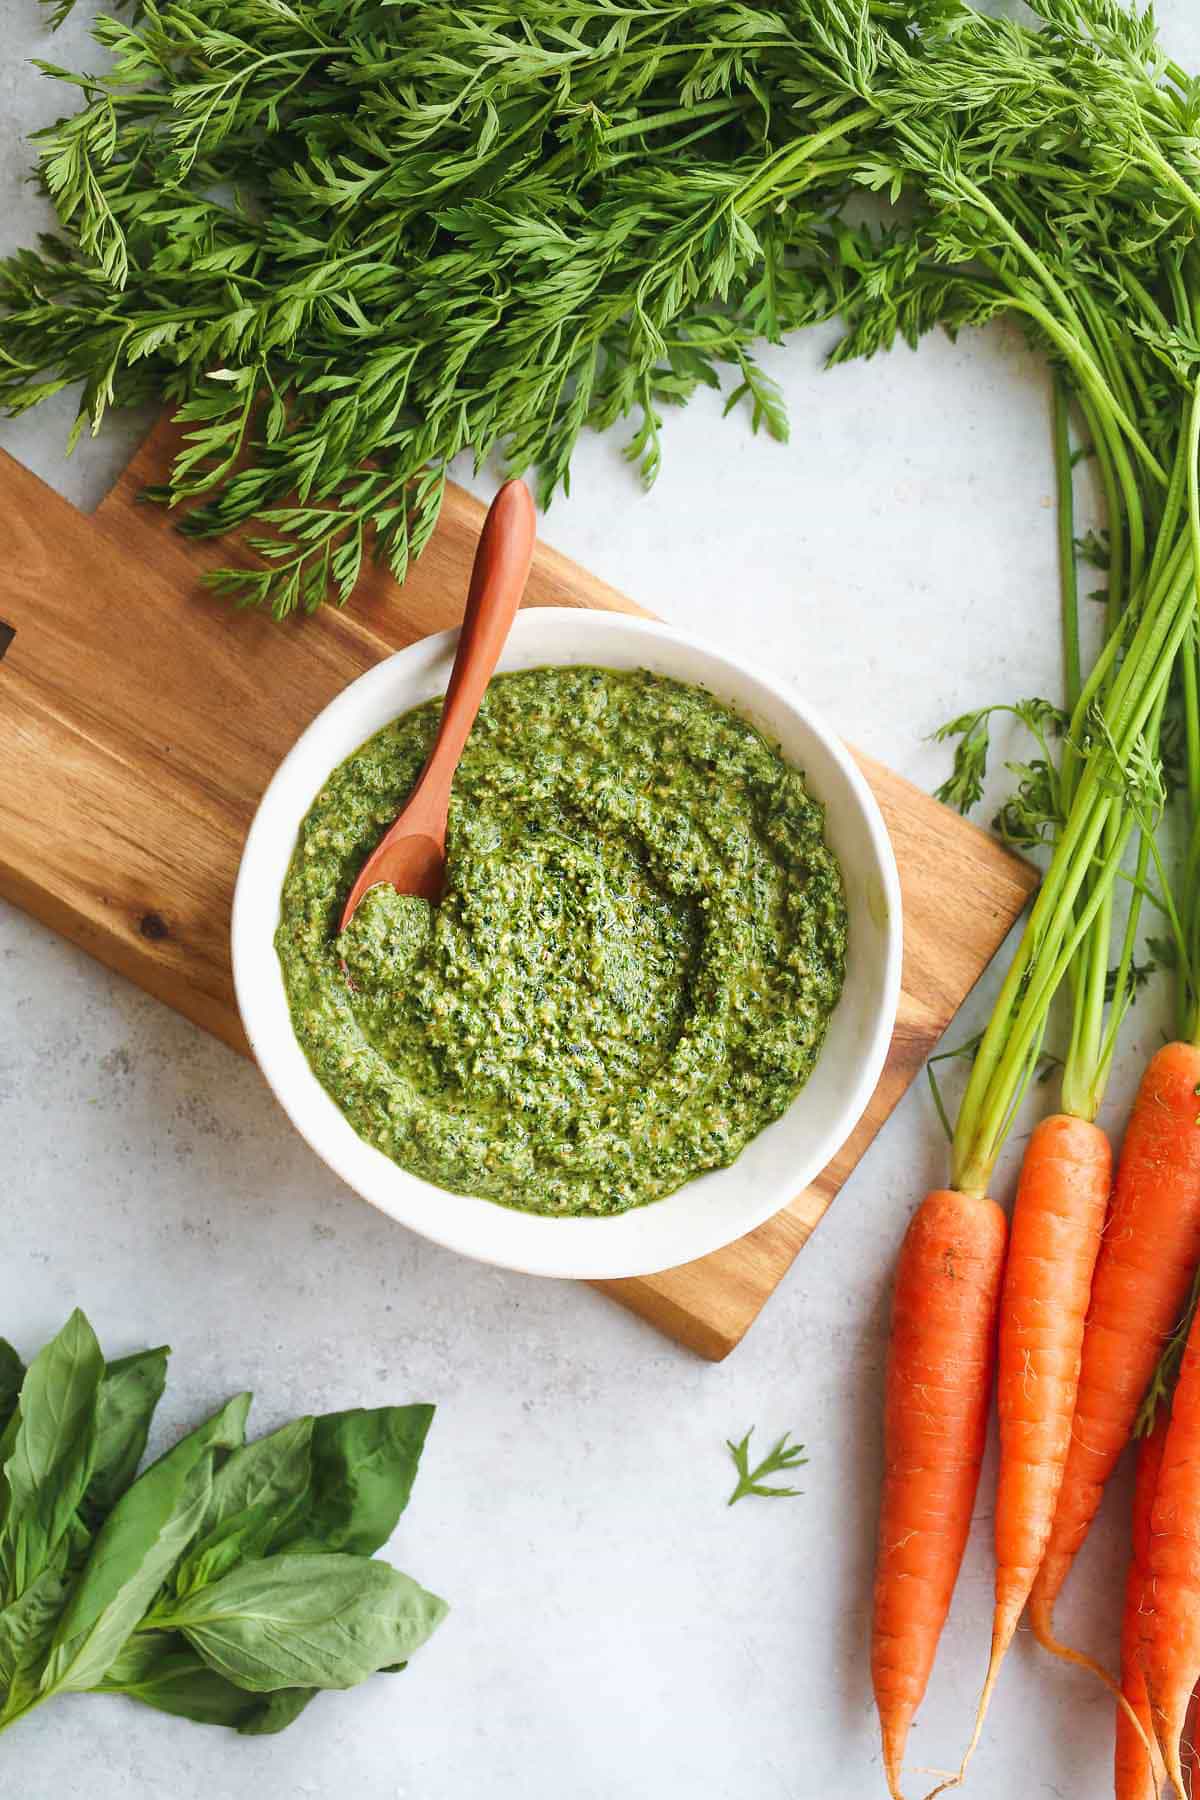 Carrot Top Pesto in a small white bowl on a wooden board. Carrots, basil leaves are laying on the side of the bowl.